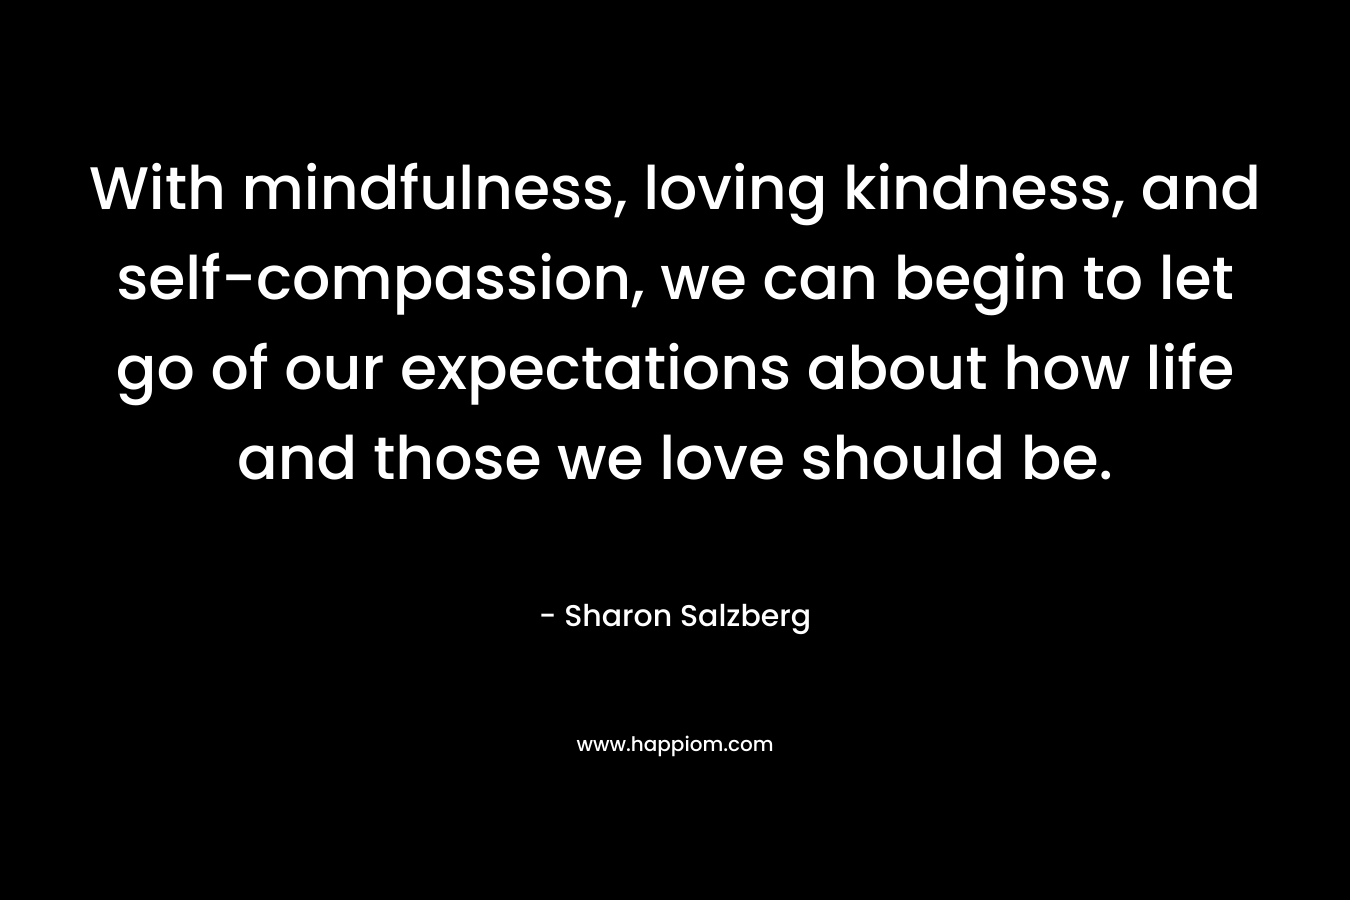 With mindfulness, loving kindness, and self-compassion, we can begin to let go of our expectations about how life and those we love should be. – Sharon Salzberg